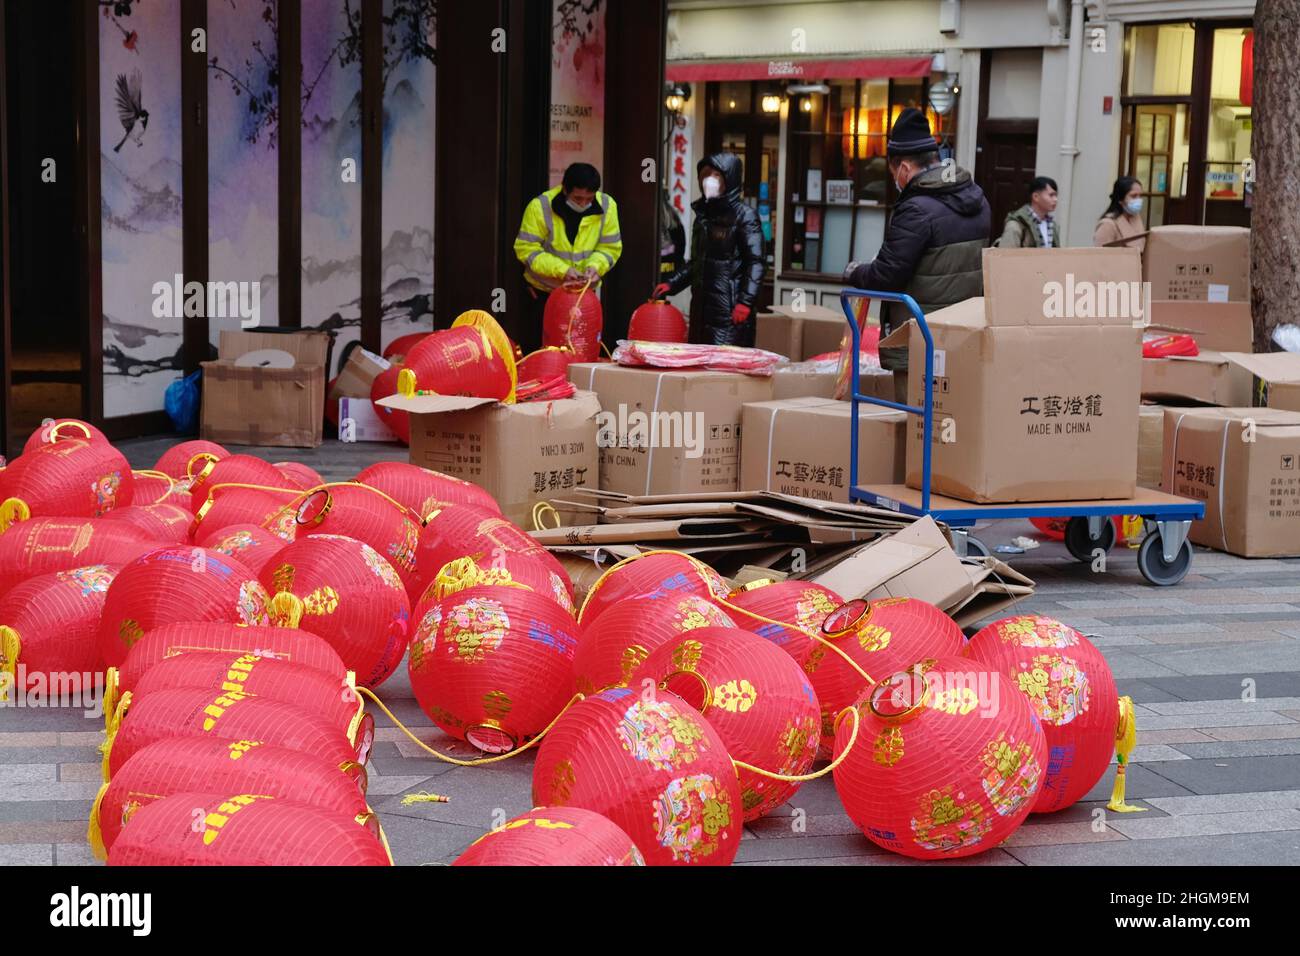 London, UK, 21st Jan, 2022. Workers in London's Chinatown take down the area's iconic red lanterns and replace with this year's versions bearing current sponsors' names, ahead of Chinese New Year on February 1st, that will see the Chinese community welcoming in the Year of the Tiger. Credit: Eleventh Hour Photography/Alamy Live News Stock Photo